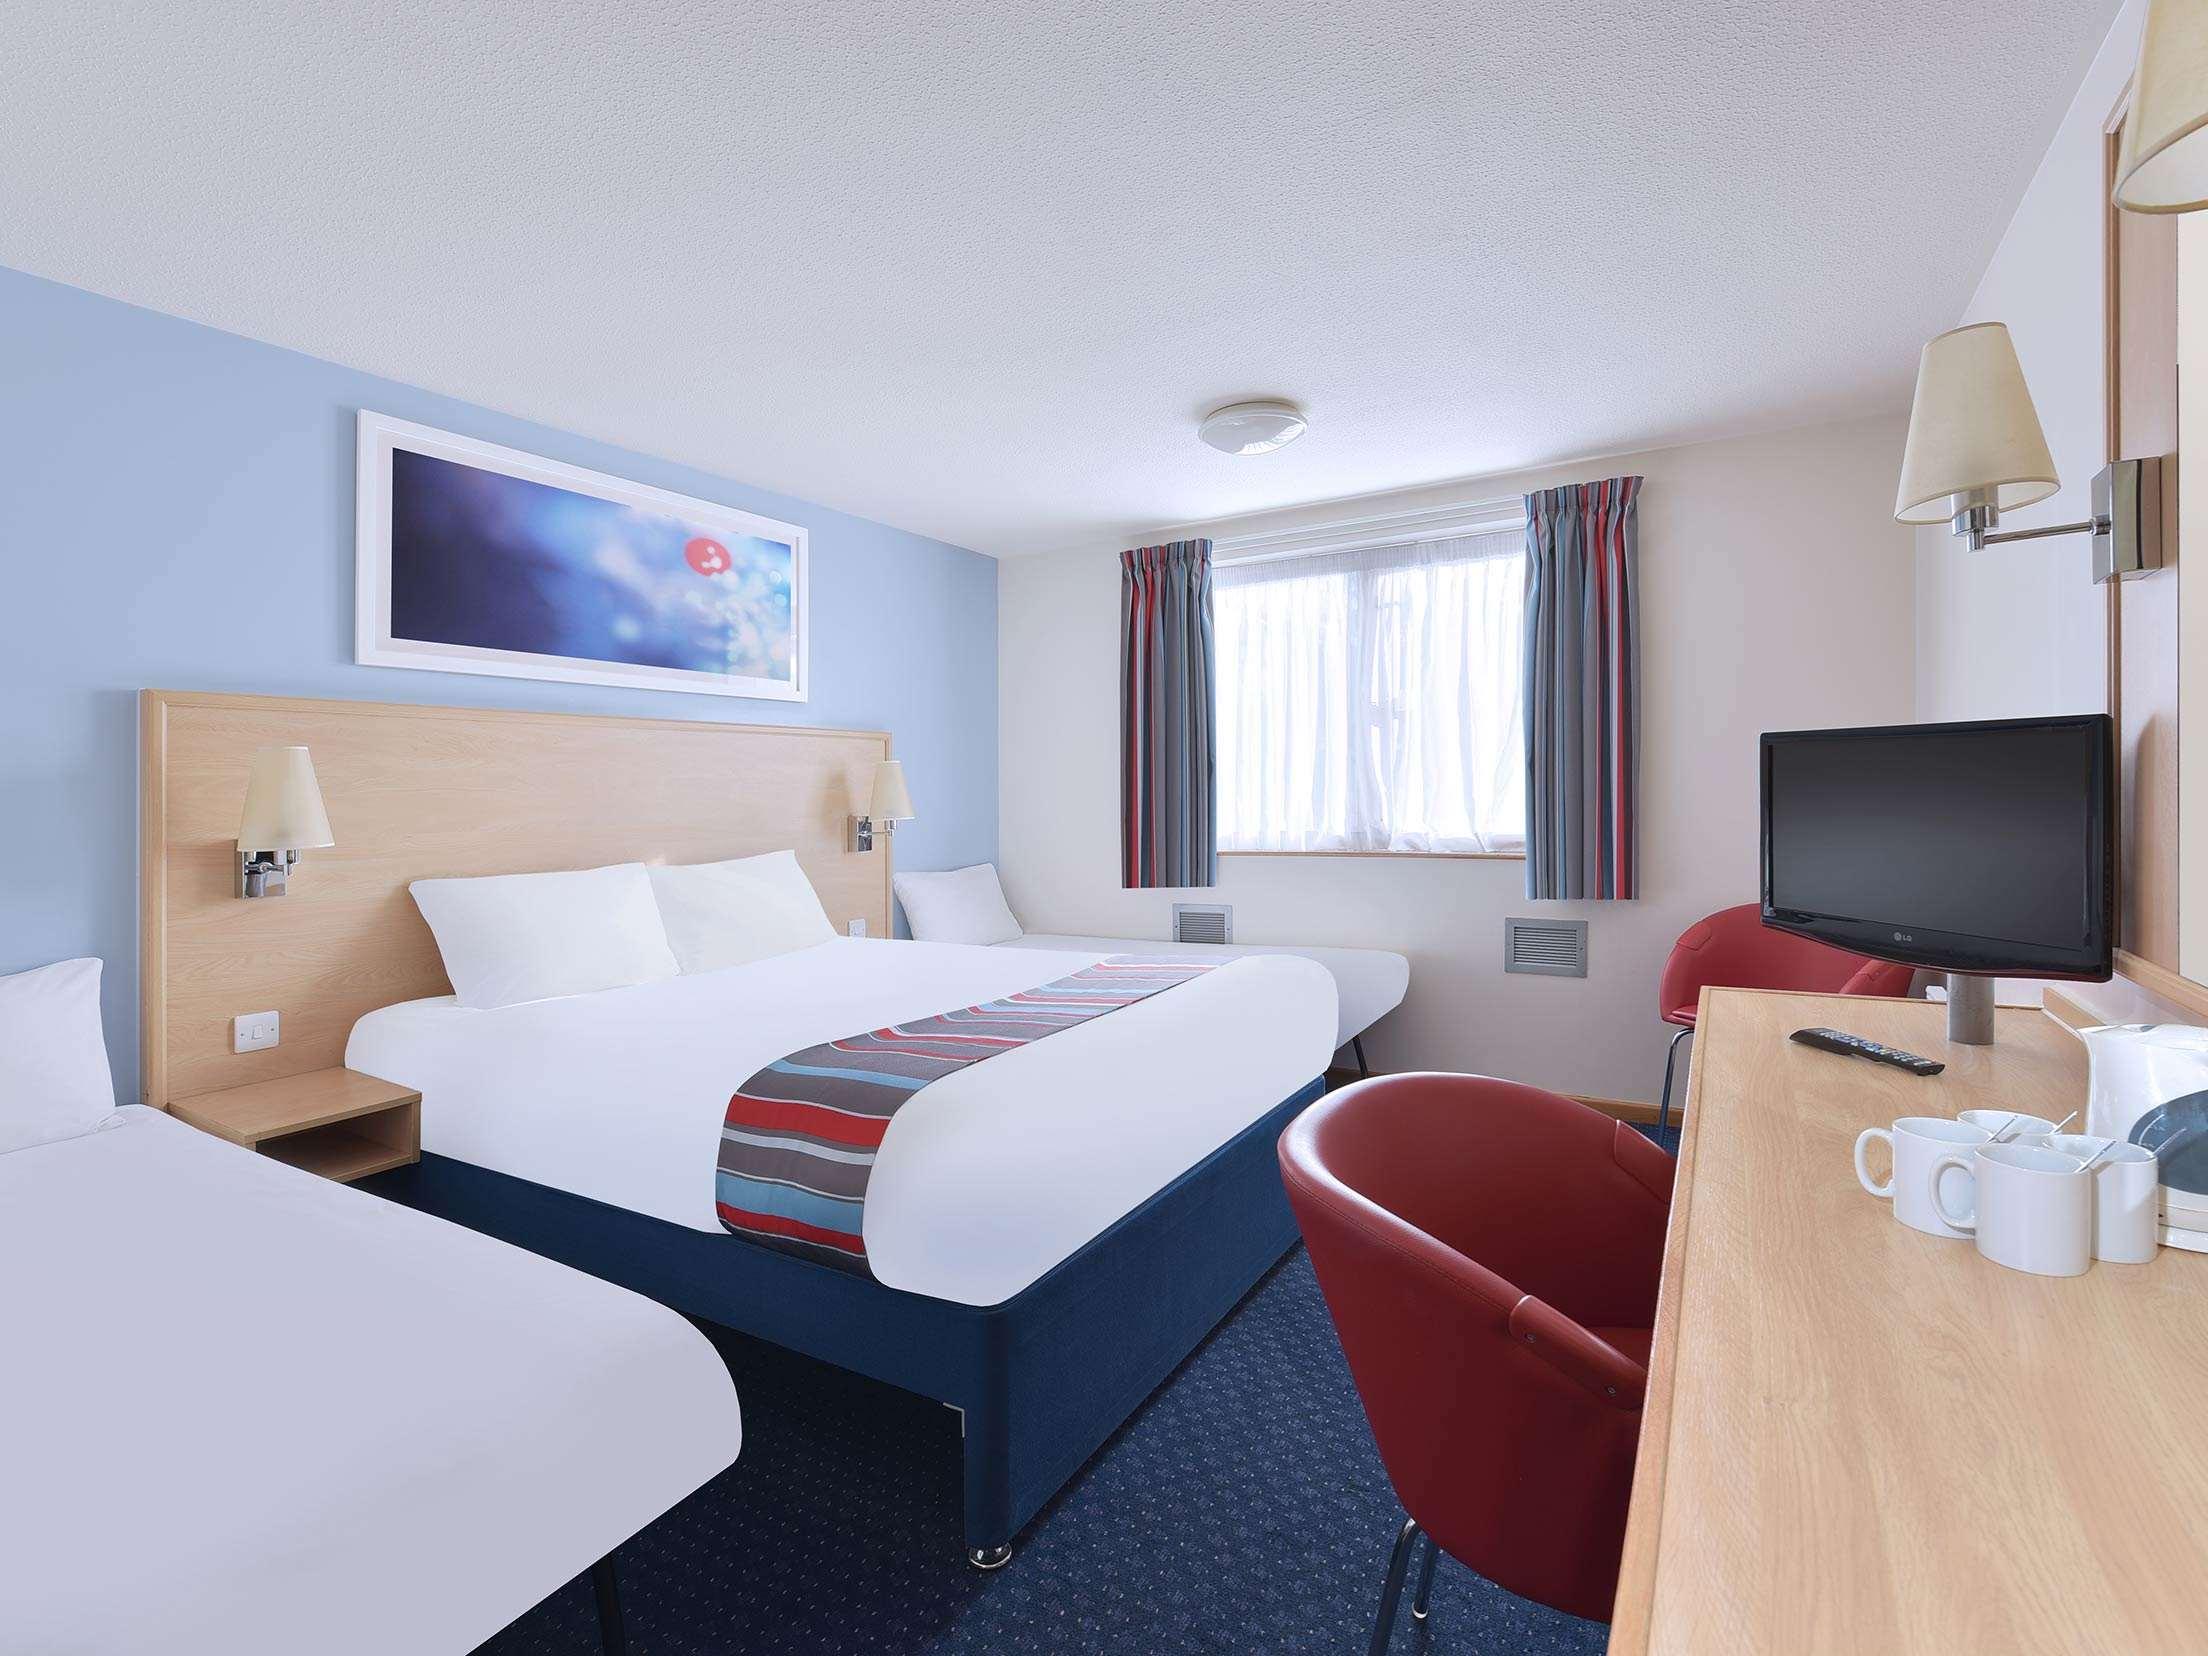 Travelodge Leicester Hinckley Road